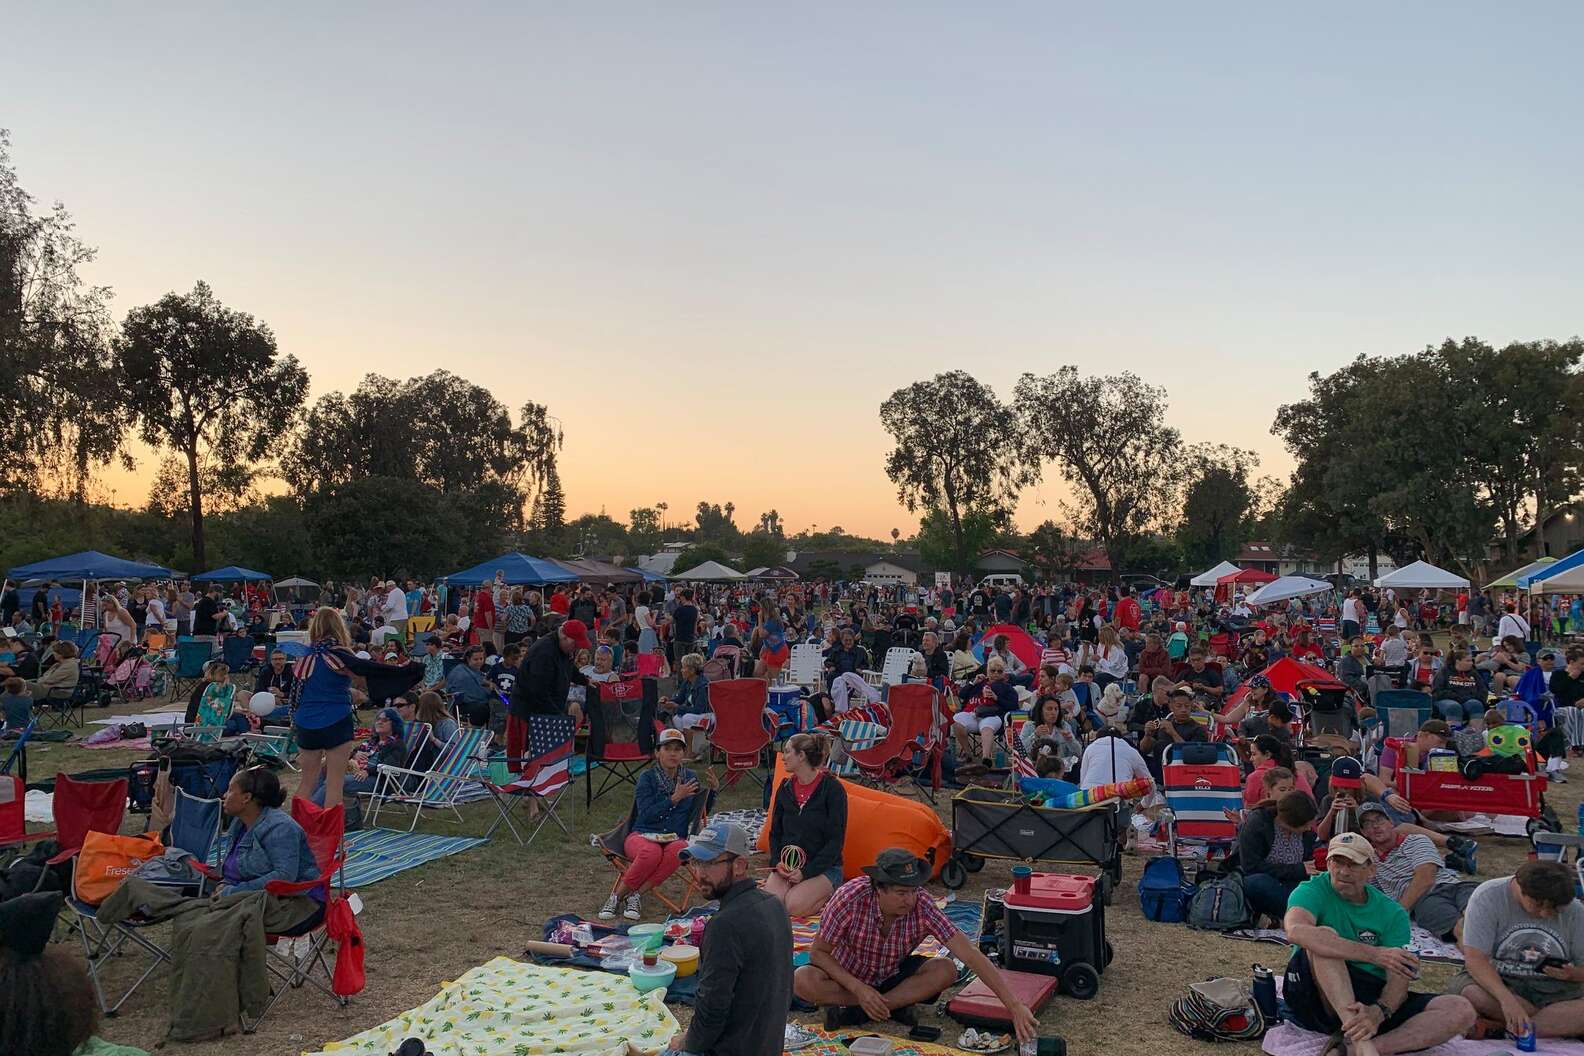 San Diego 4th of July Fireworks 2022 Where to Watch, Start Time & More